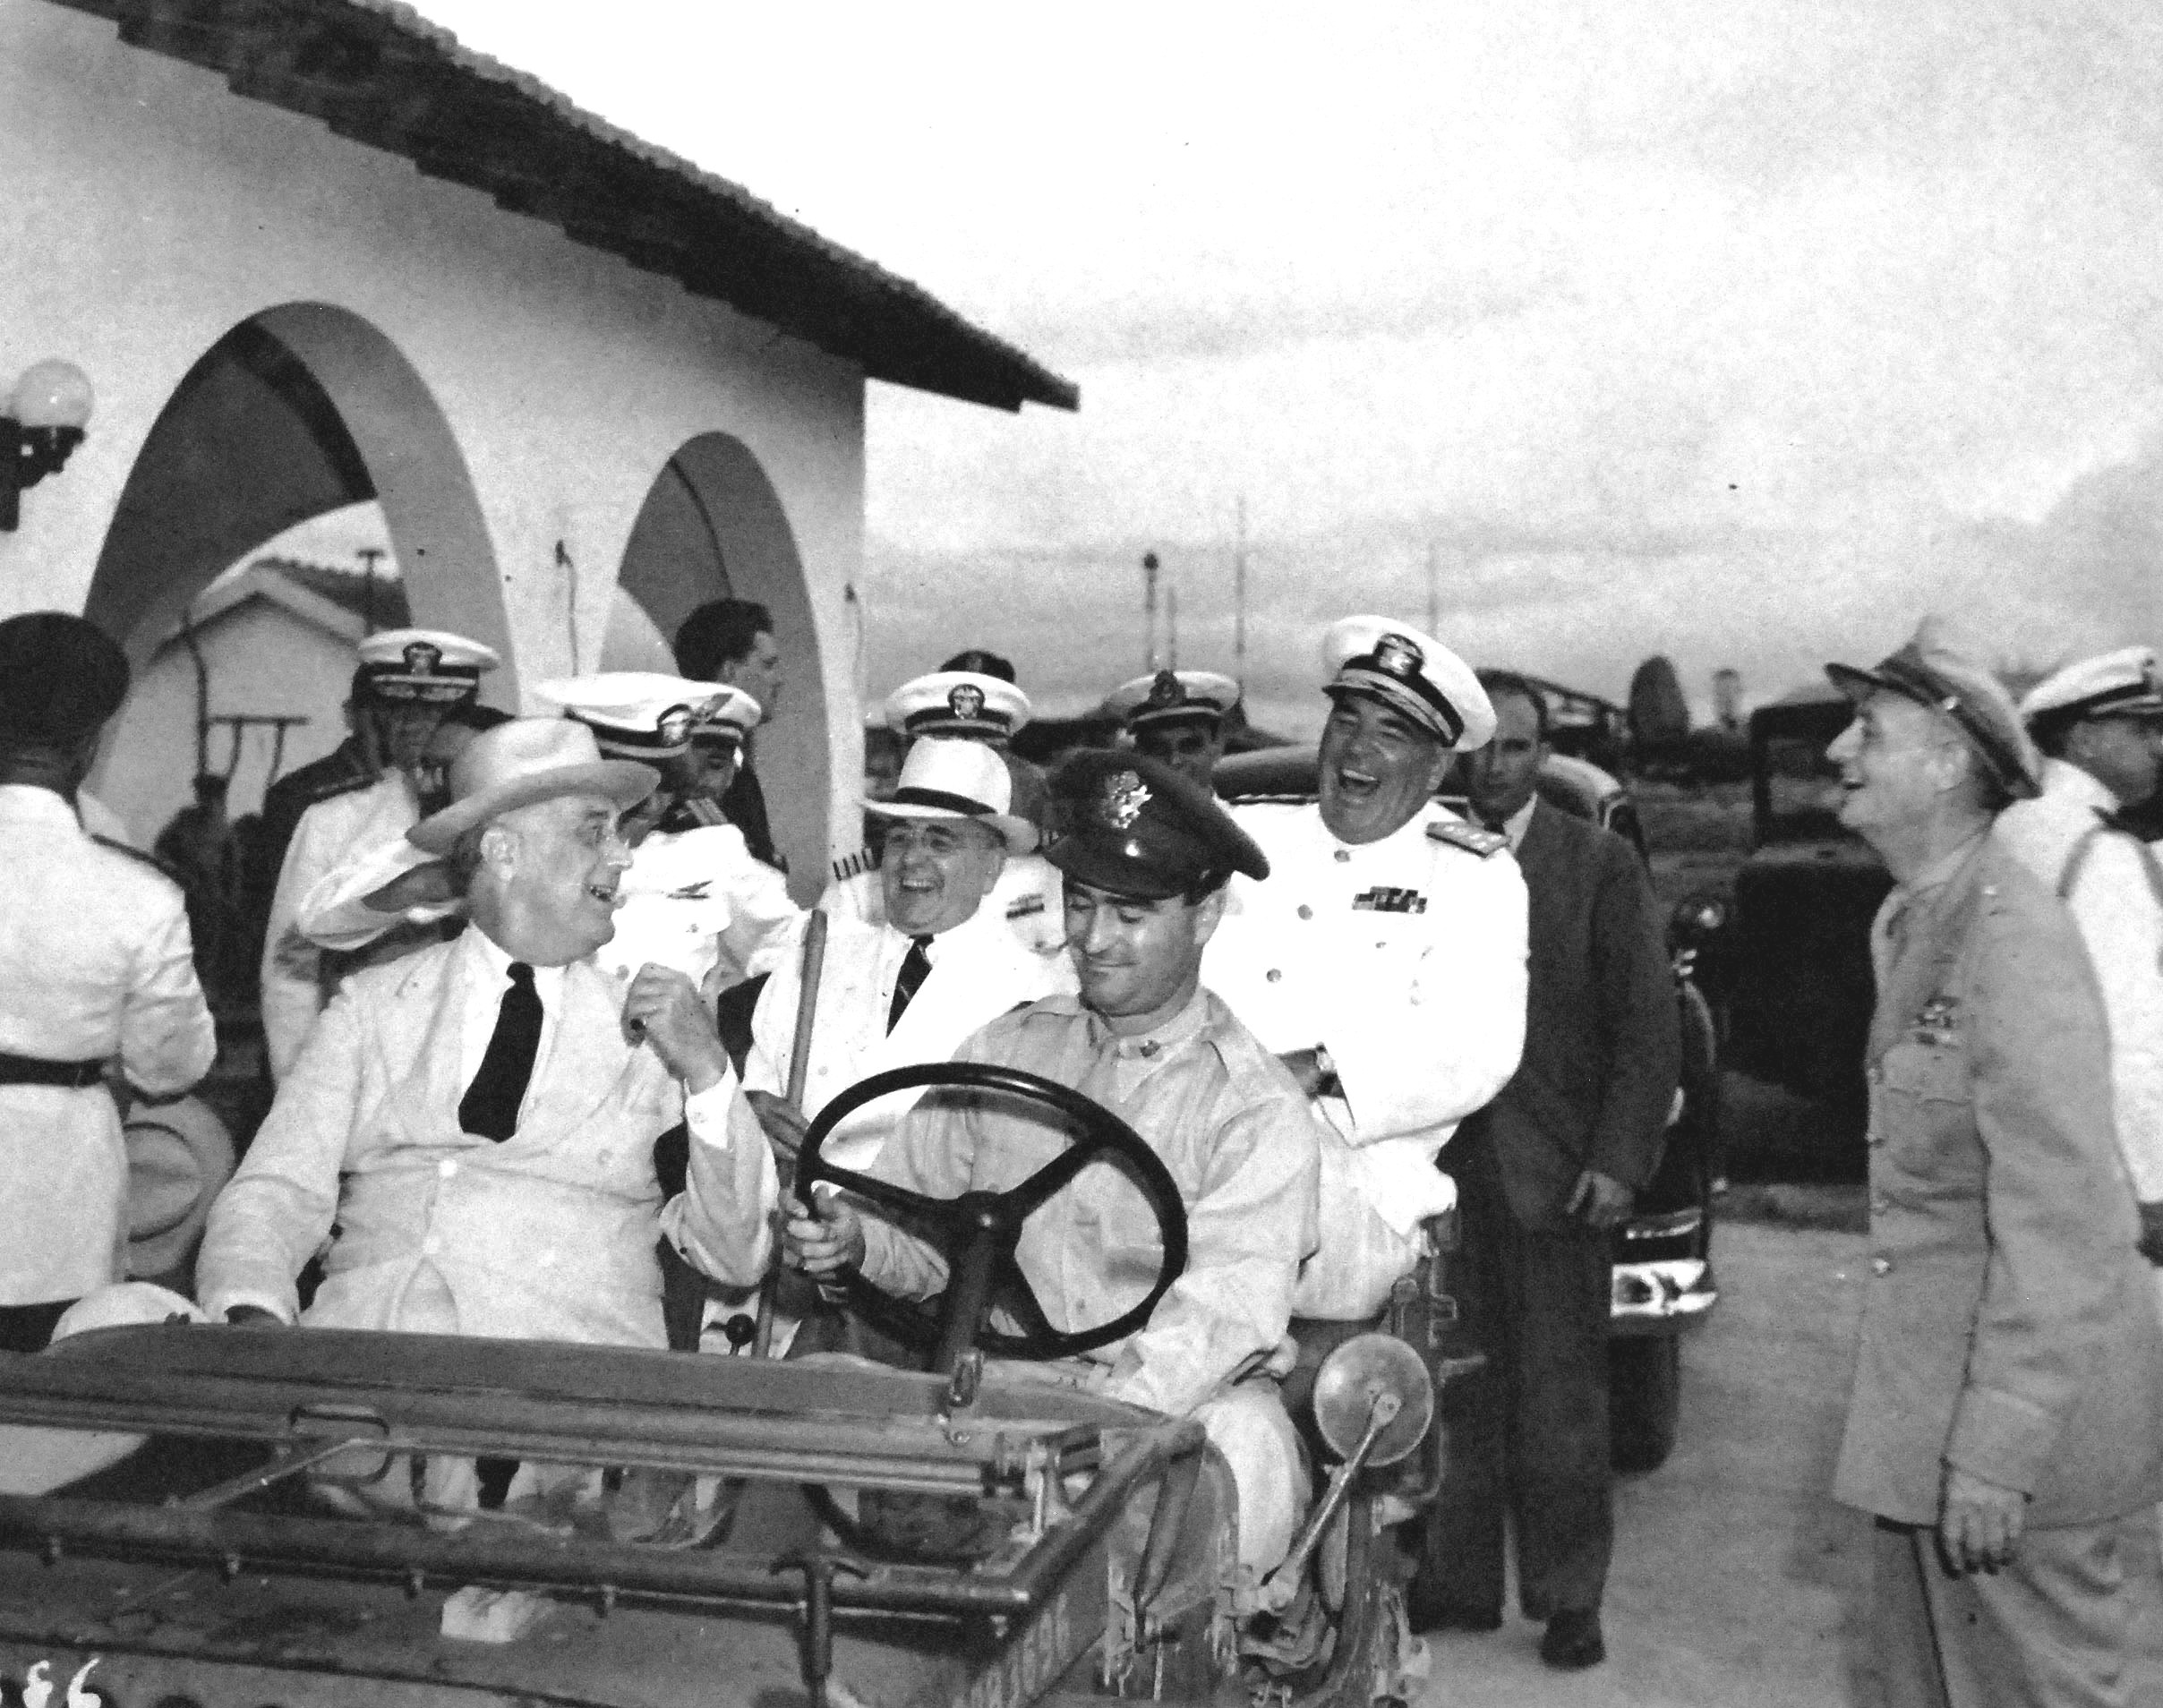 Franklin Roosevelt inspecting facilities in Natal, Brazil as he travels back to the United States after the Casablanca Conference, 28 Jan 1943. Brazilian president Getulio Vargas is seated in the back seat of the Jeep.